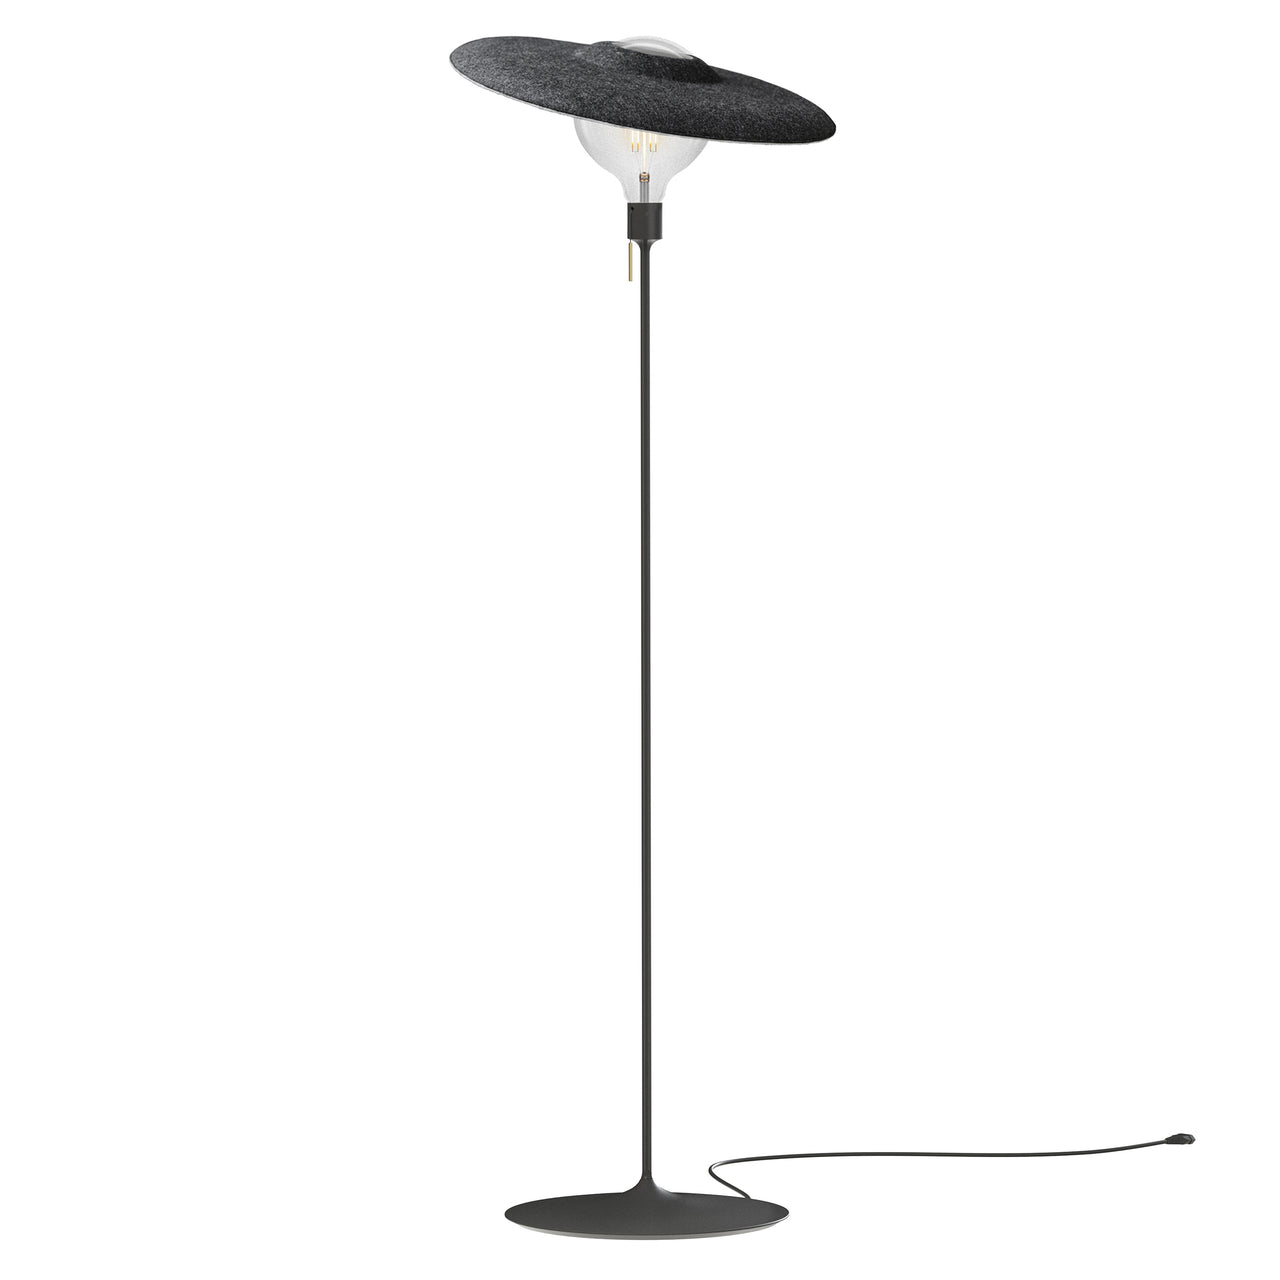 Shade Champagne Floor Lamp: Black + With Bulb (3 W)